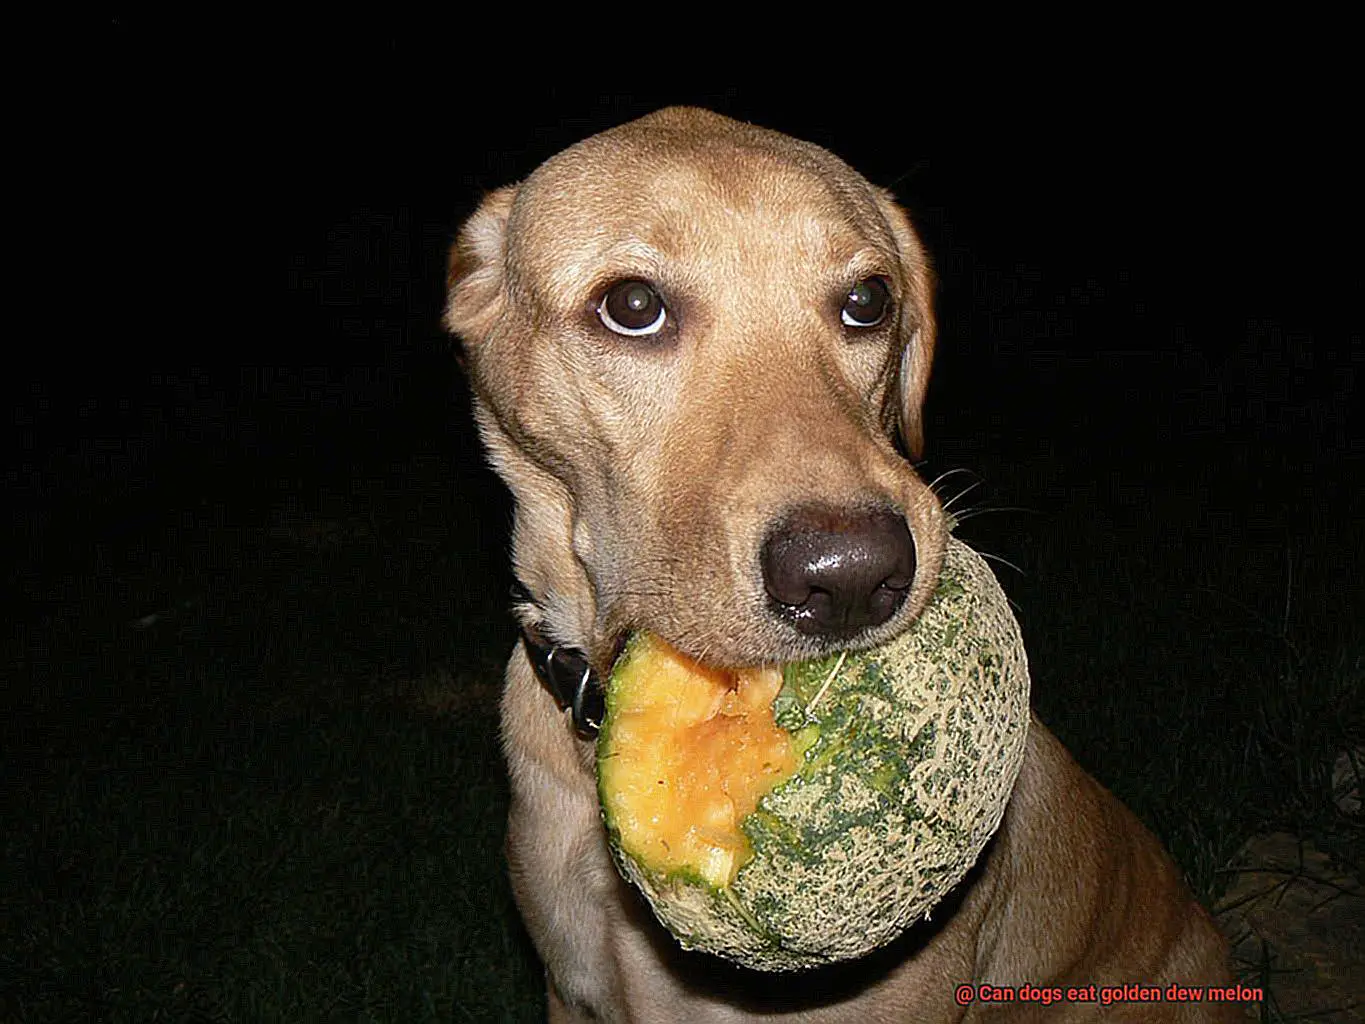 Can dogs eat golden dew melon-5